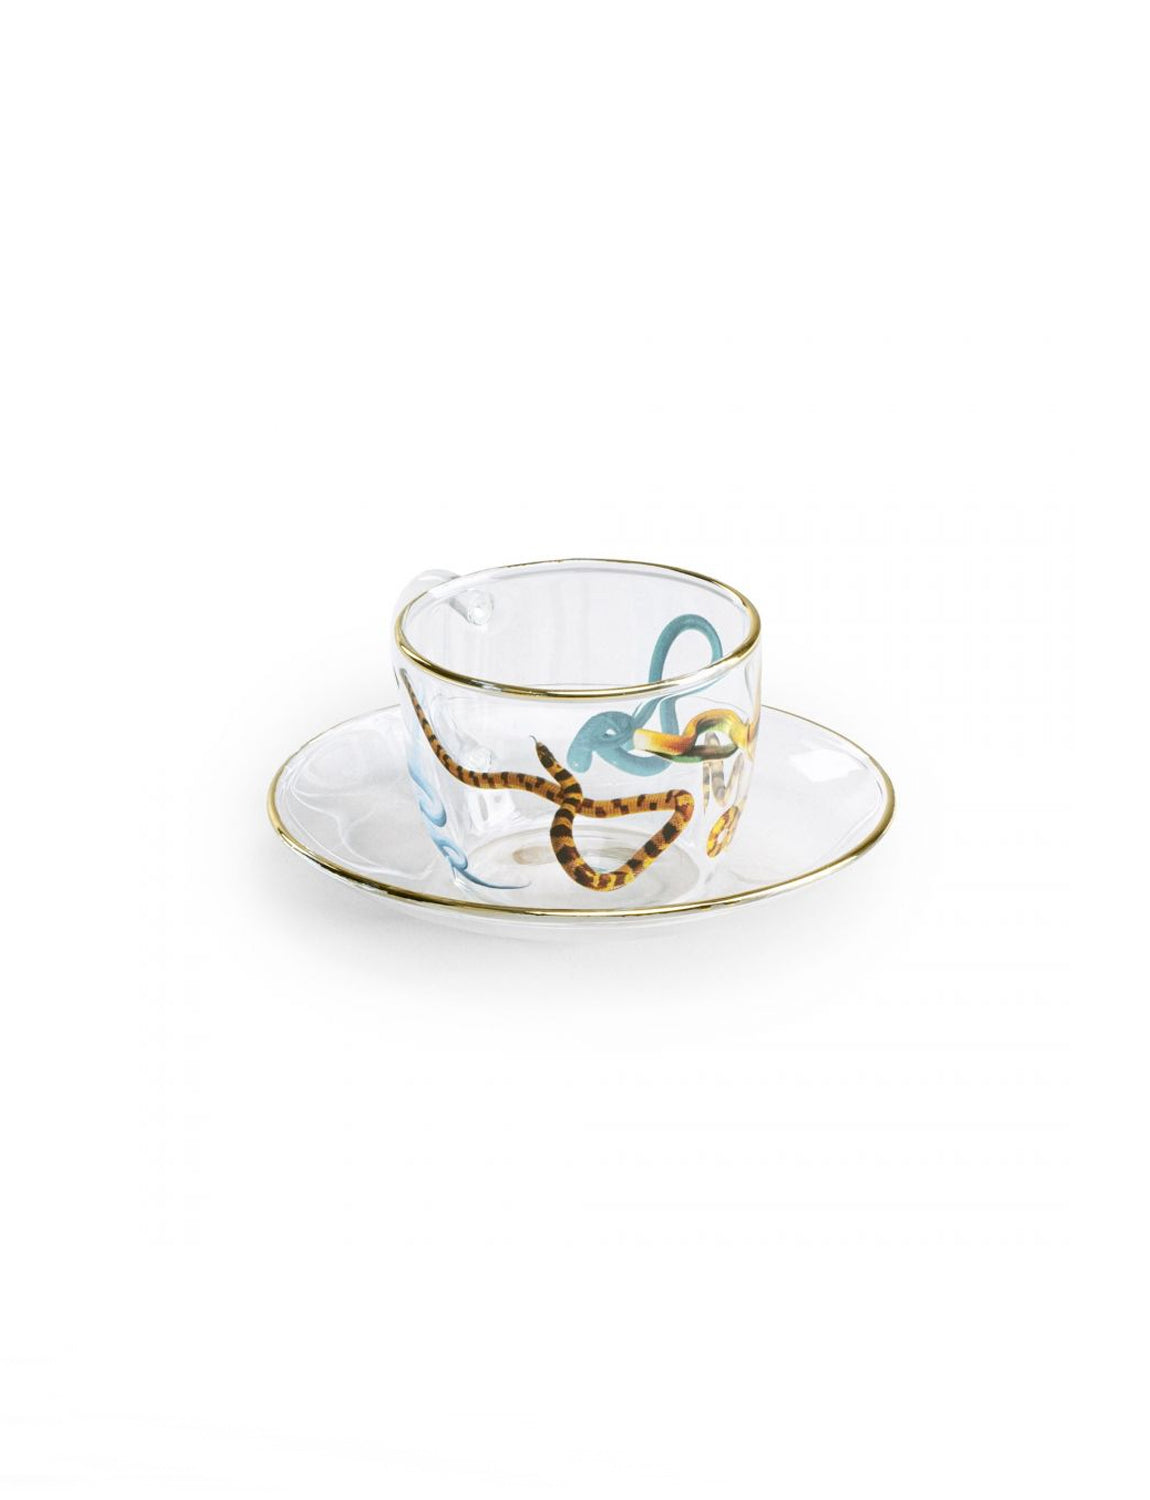 Seletti Toiletpaper Coffee Cup w/ Saucer, snakes